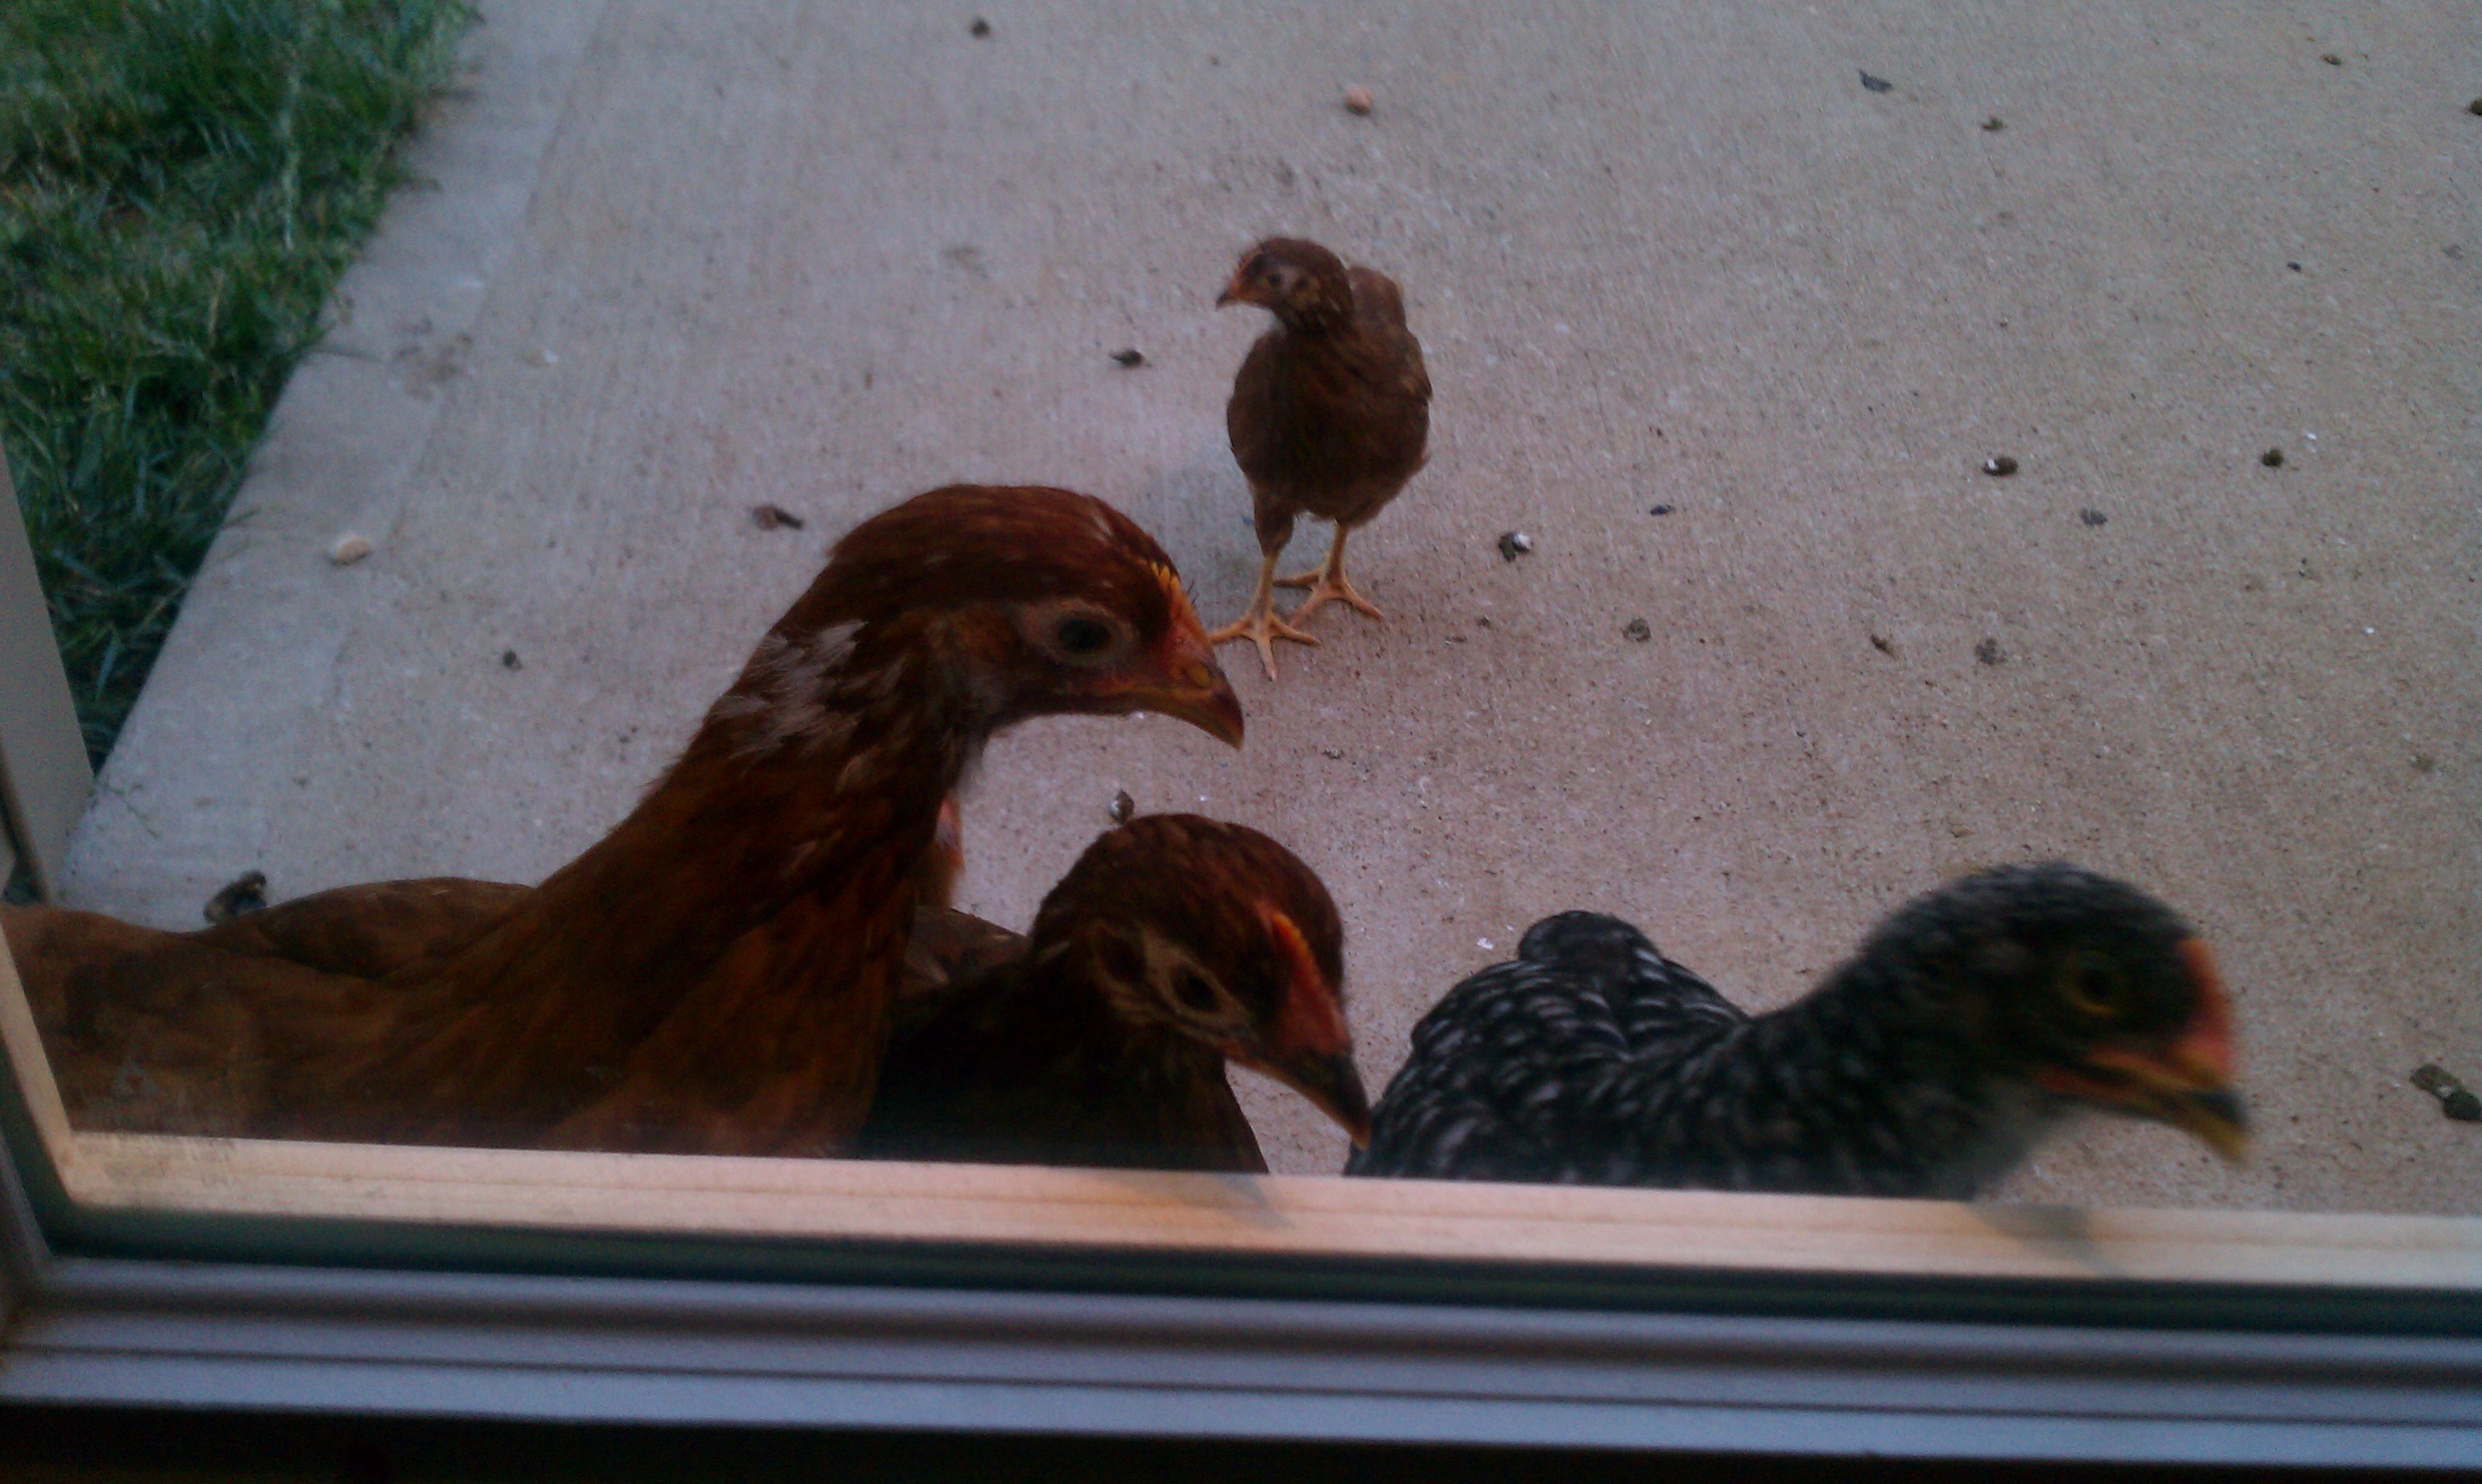 The girls wanting to come in...sooo cute!